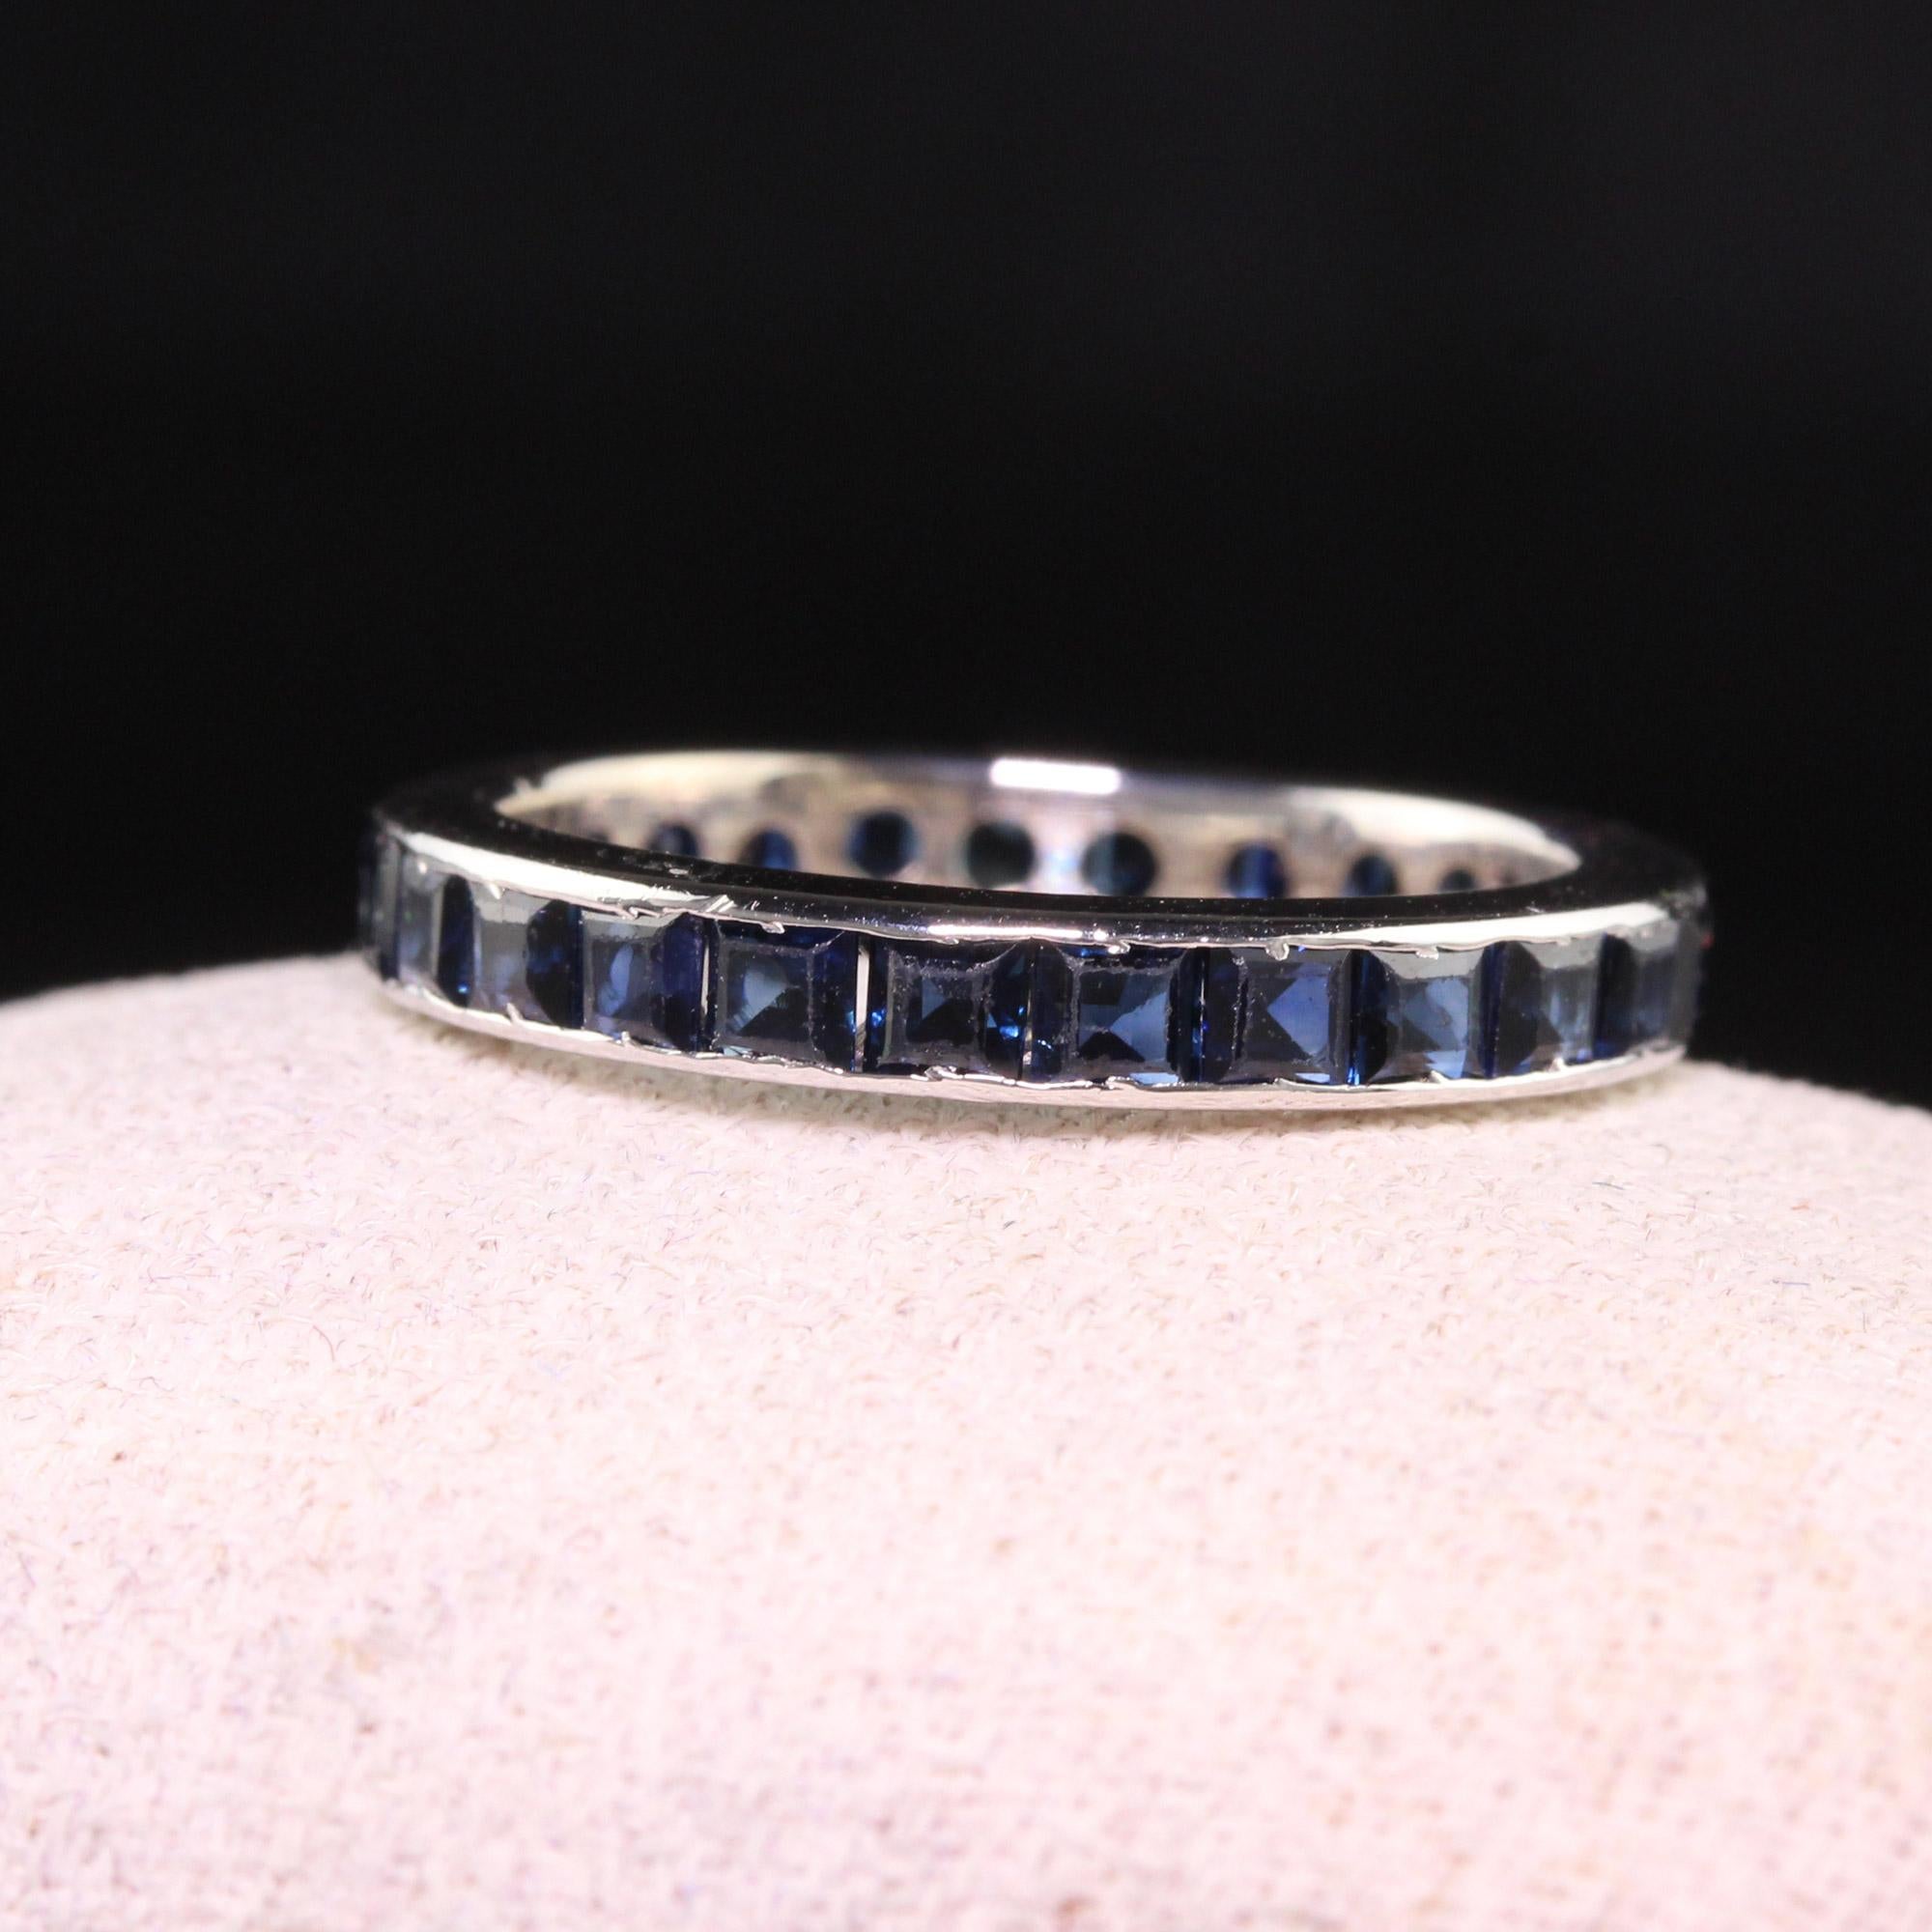 Beautiful Vintage Estate 18K White Gold Square Cut Sapphire Eternity Band. This beautiful band is crafted in 18k white gold. There are square cut natural sapphires going around the entire ring and it is in good condition.

Item #R1383

Metal: 18K